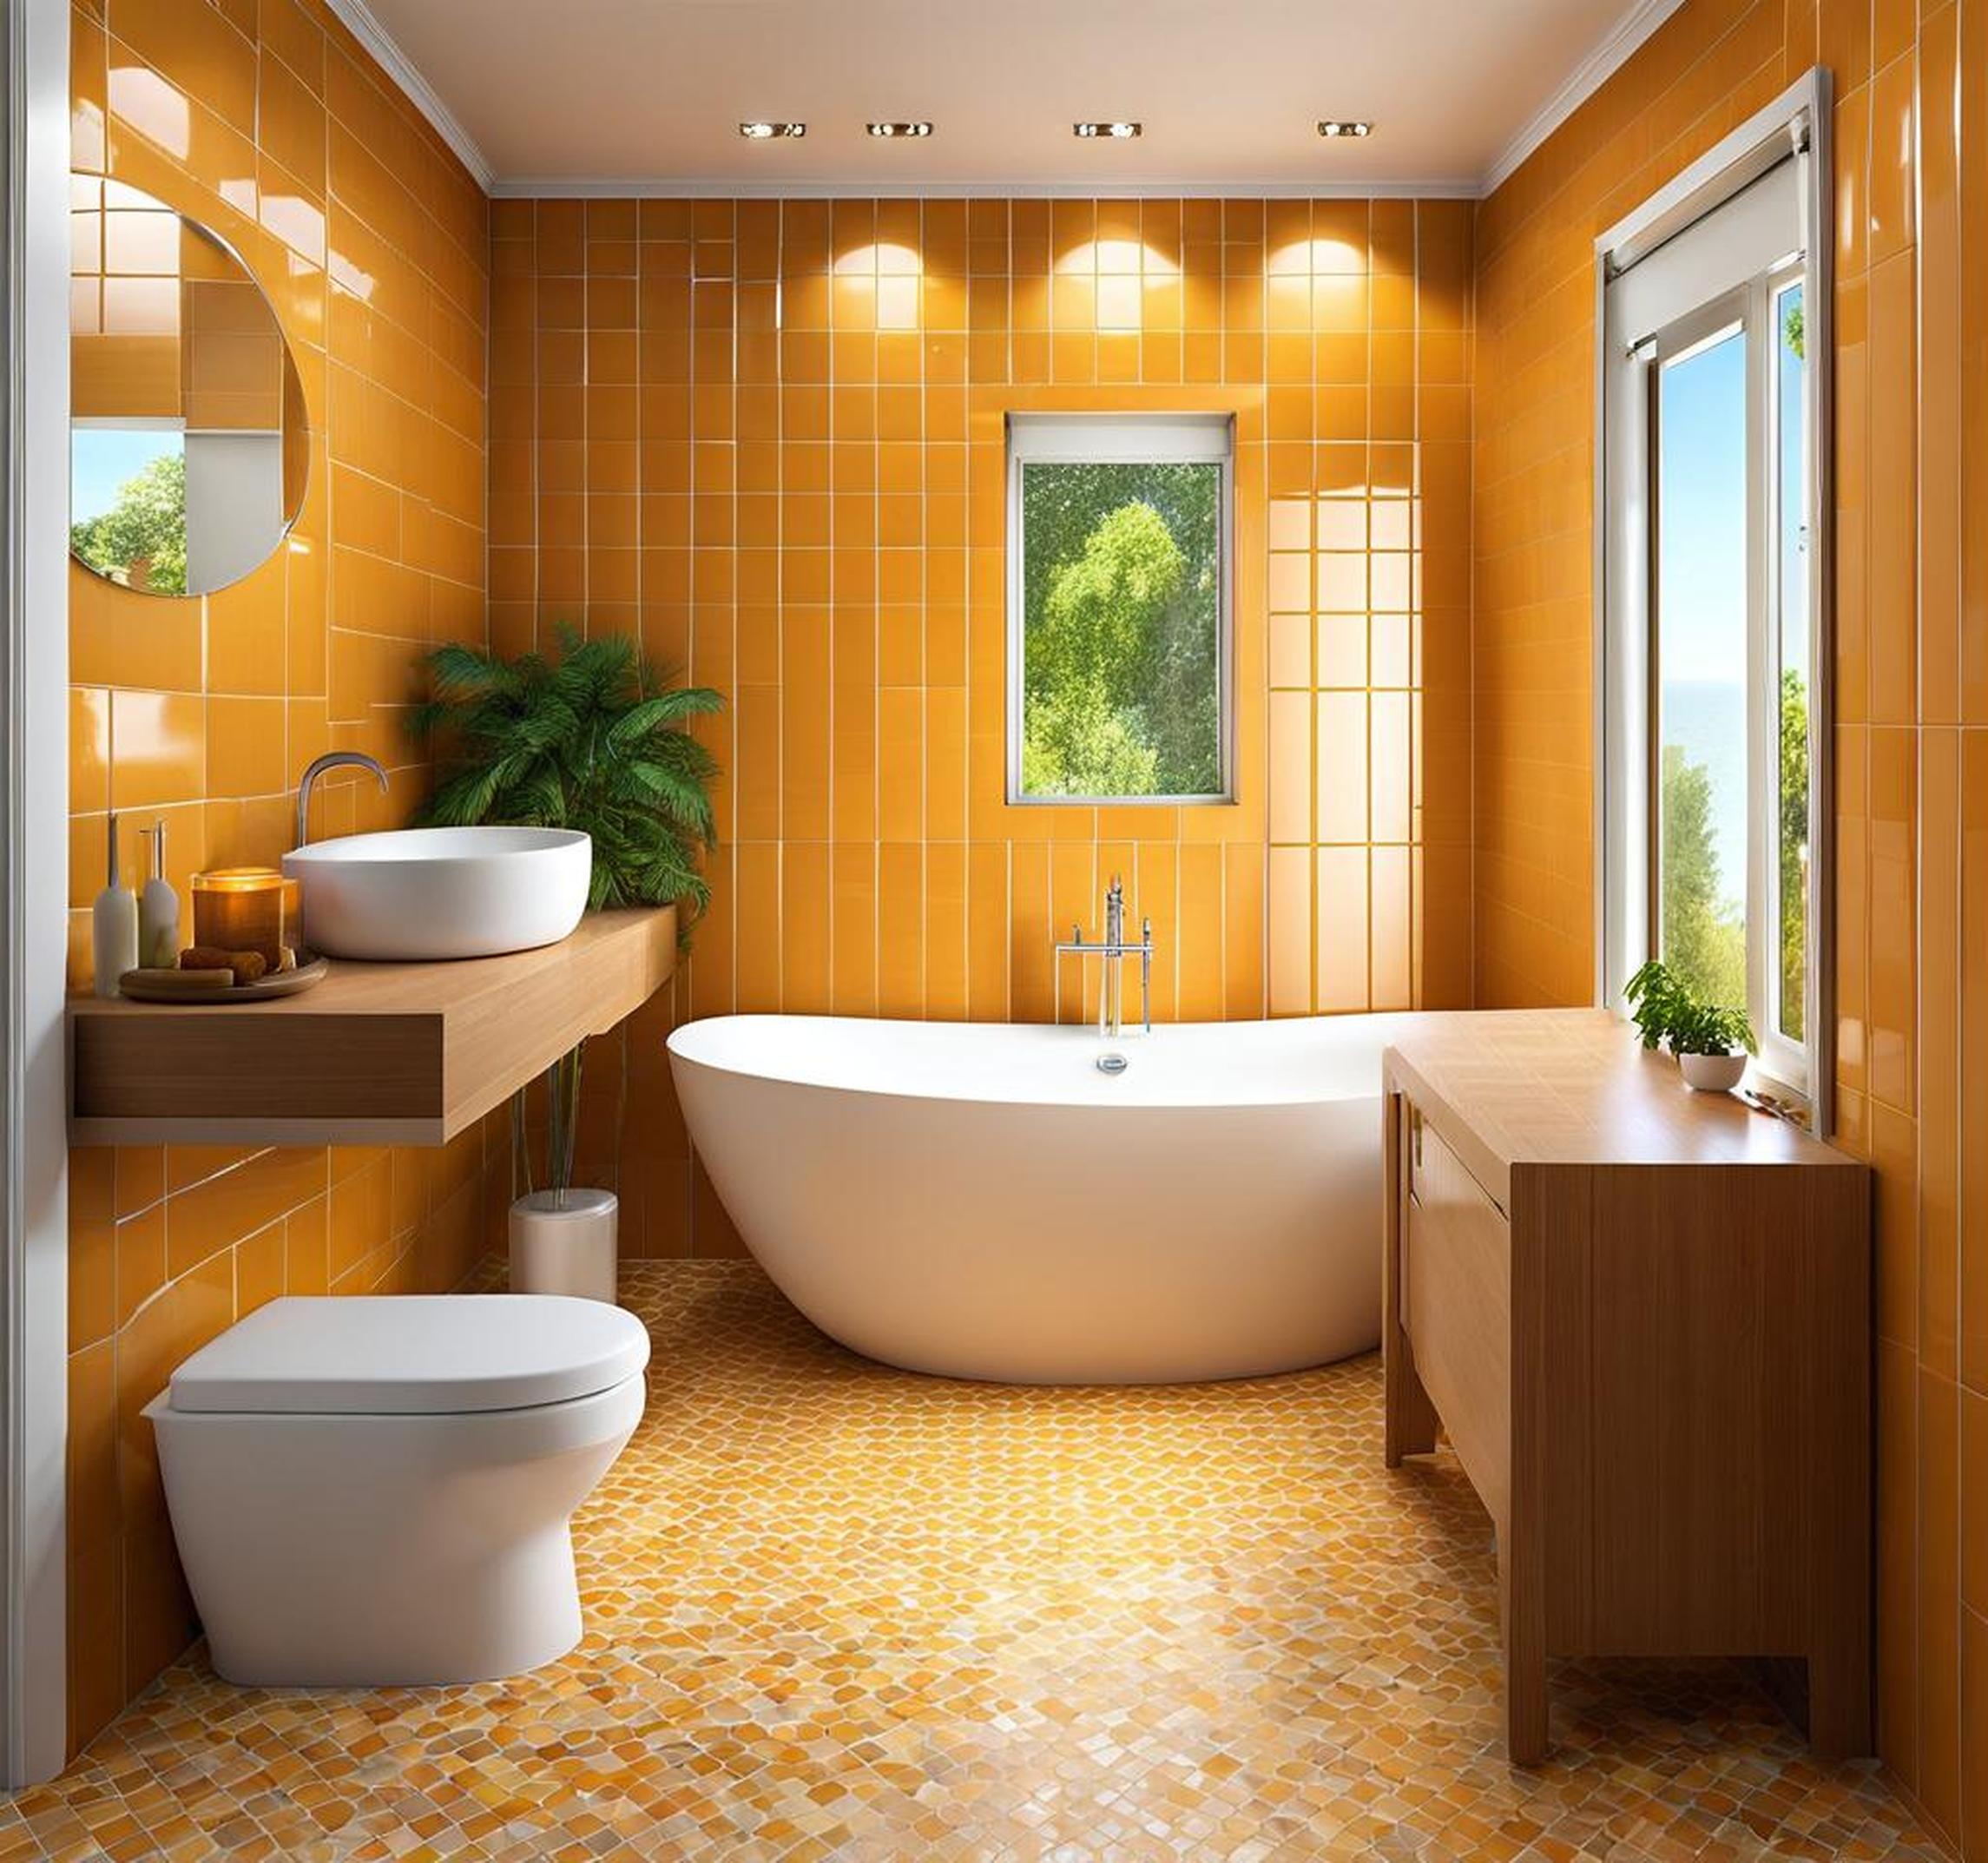 Paint or Panels? Clever Options for Covering Up Bathroom Tiles